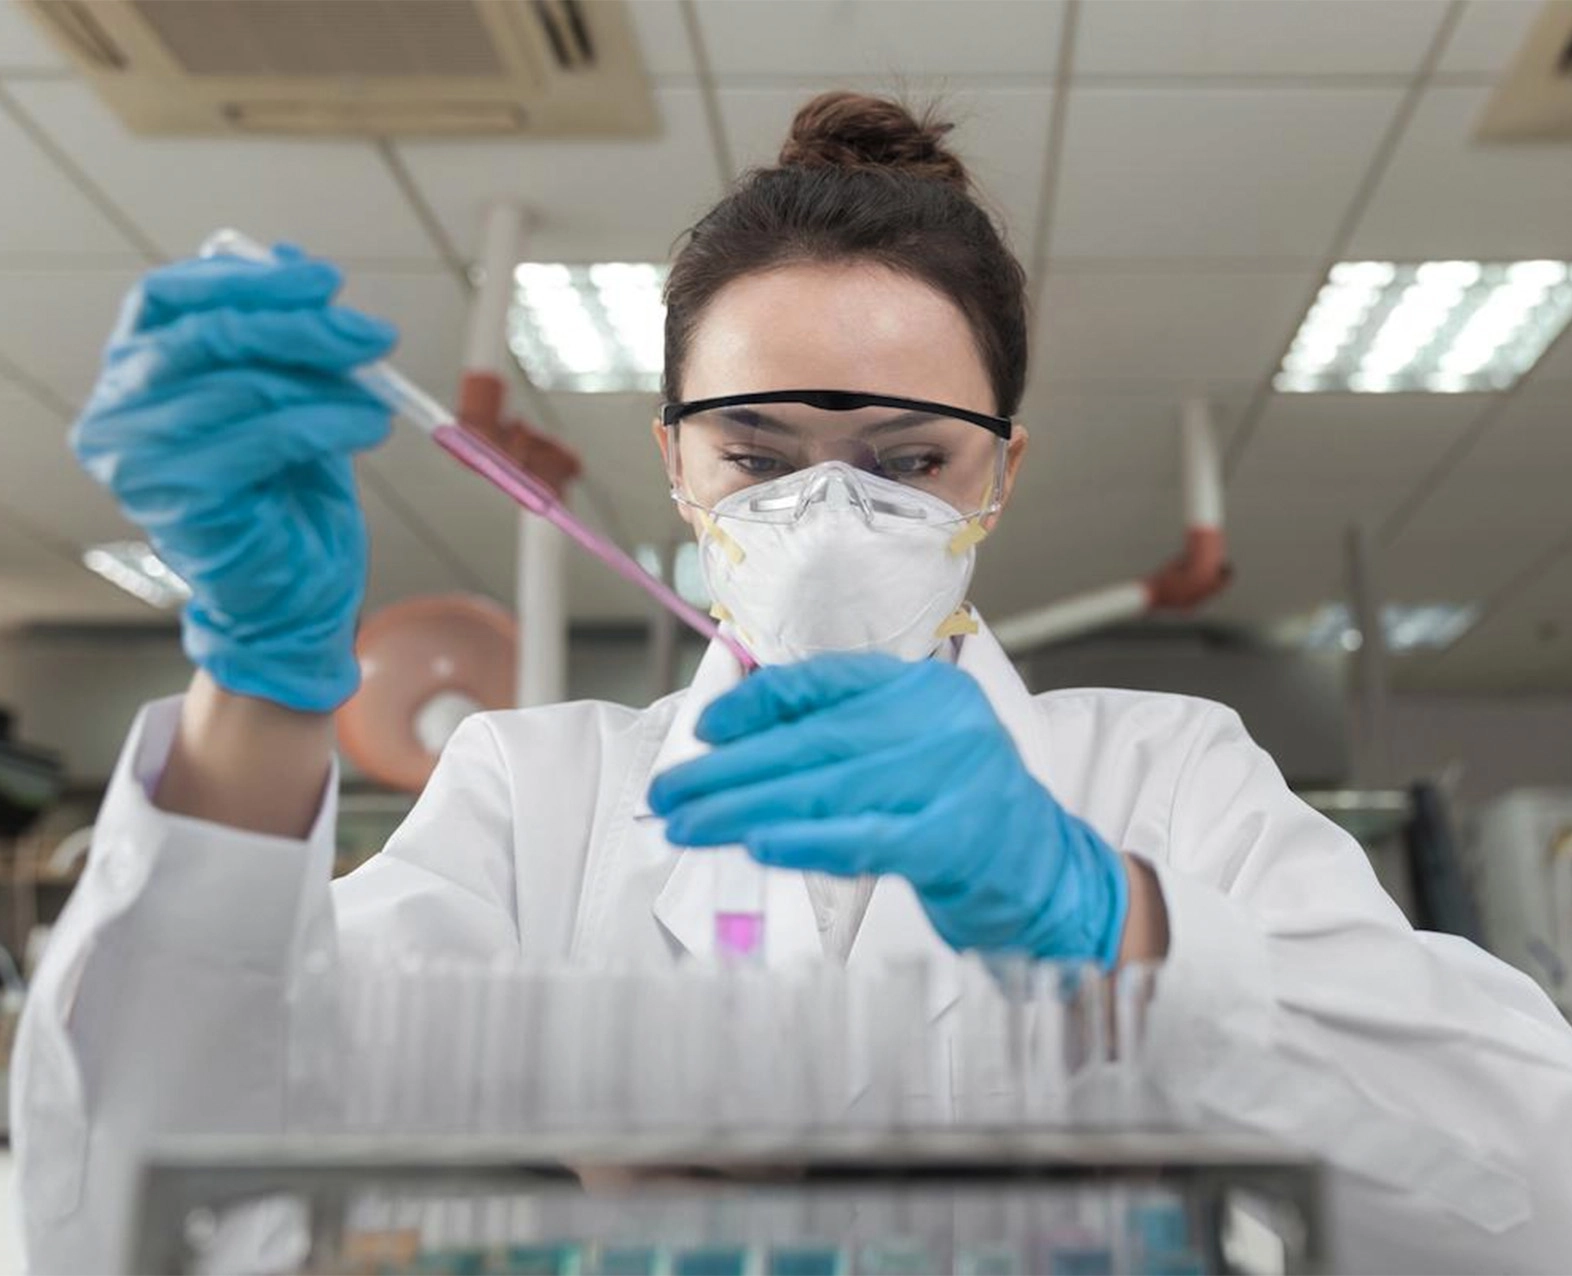 A woman scientist working in a lab with safety goggles, mask, and gloves. (photo)